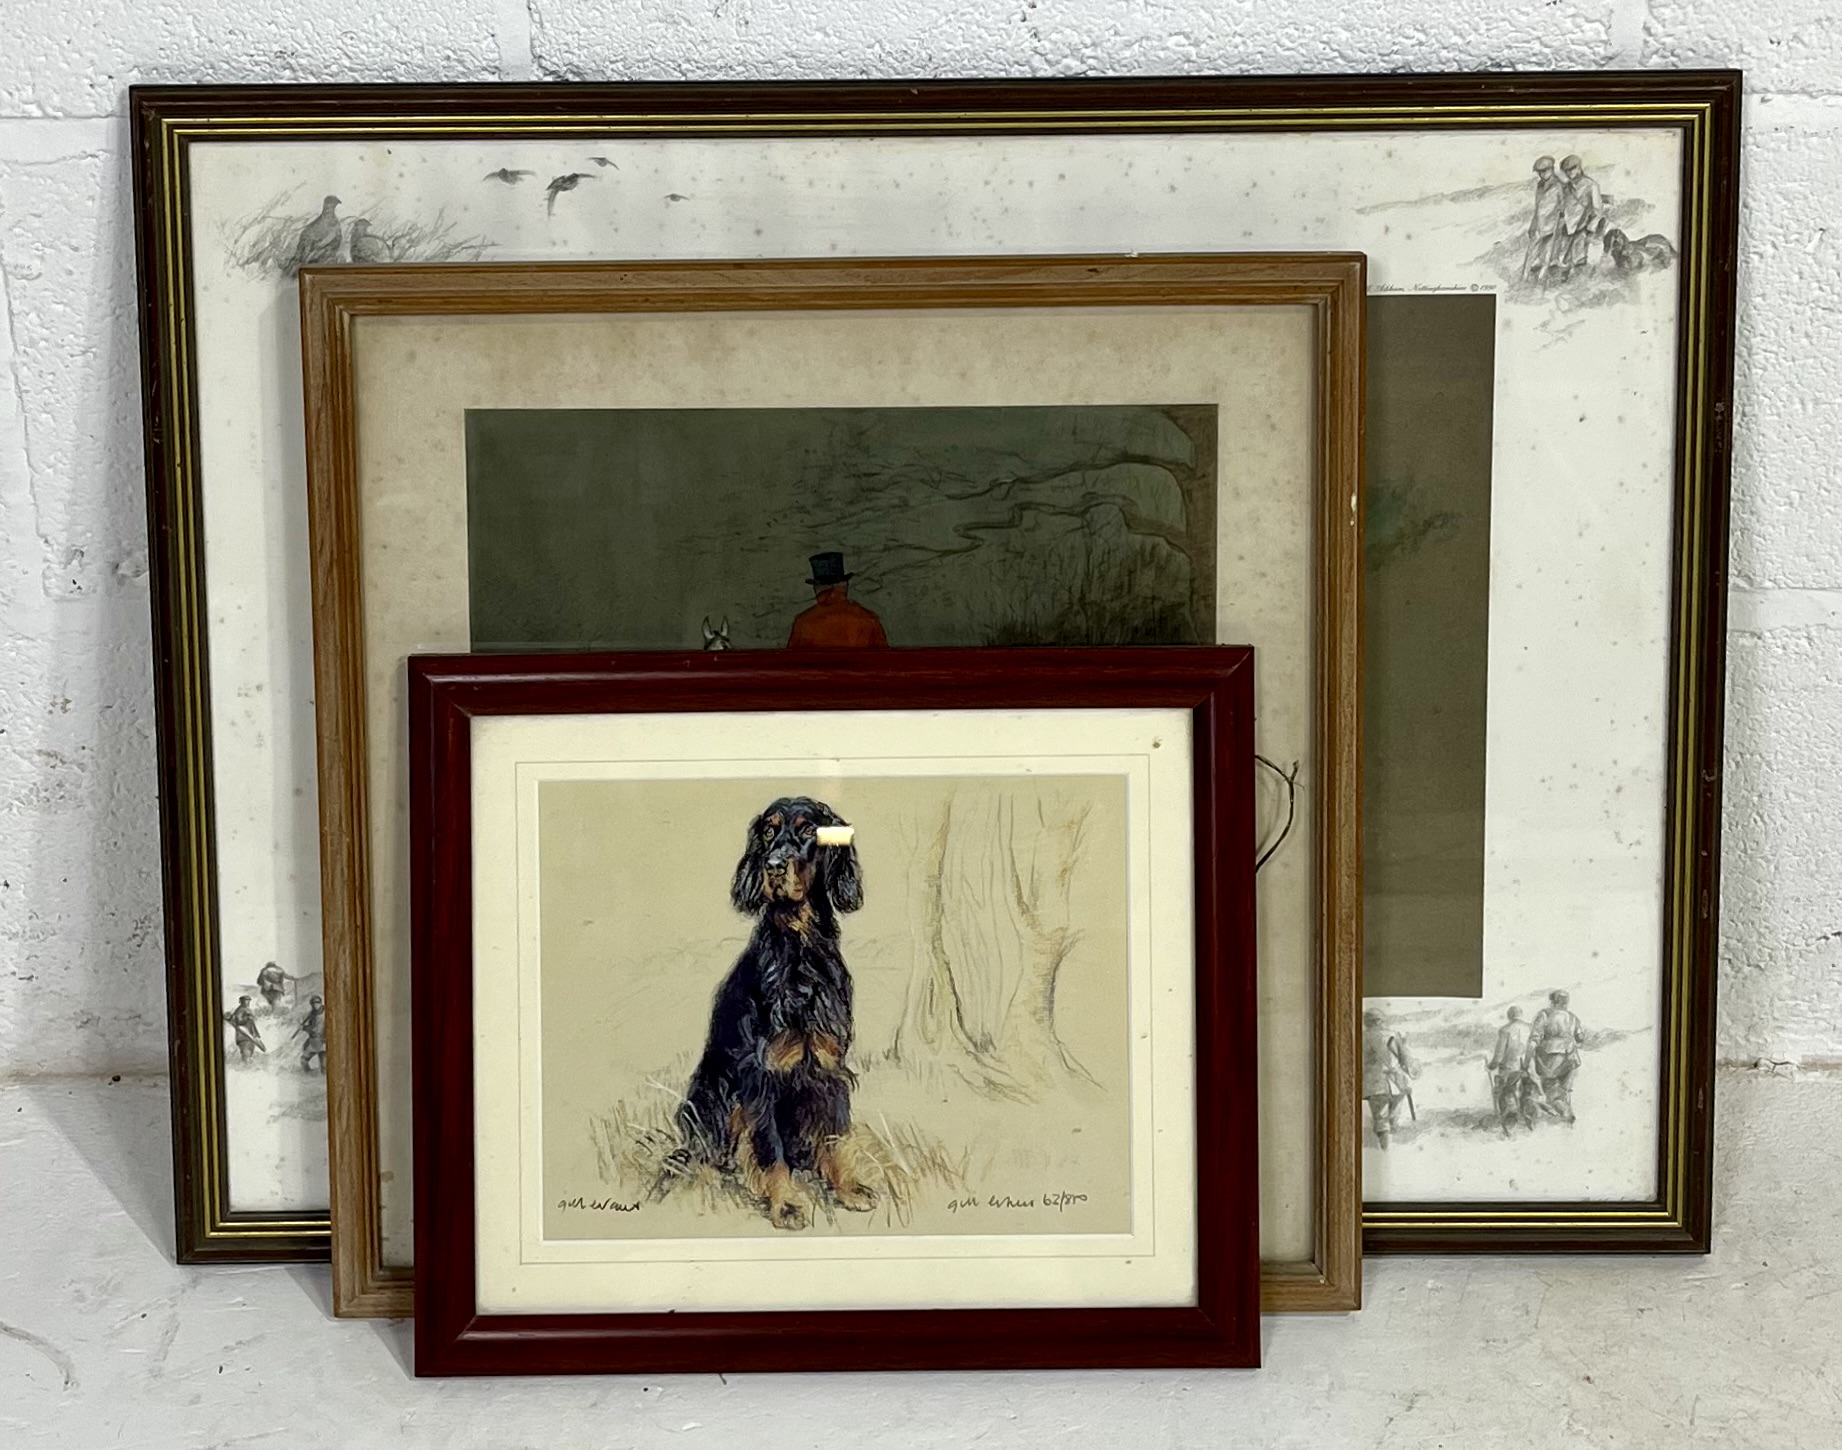 A framed Charles "Snaffles" Johnson Payne print "The Sportsman who hunts for the love of it" overall